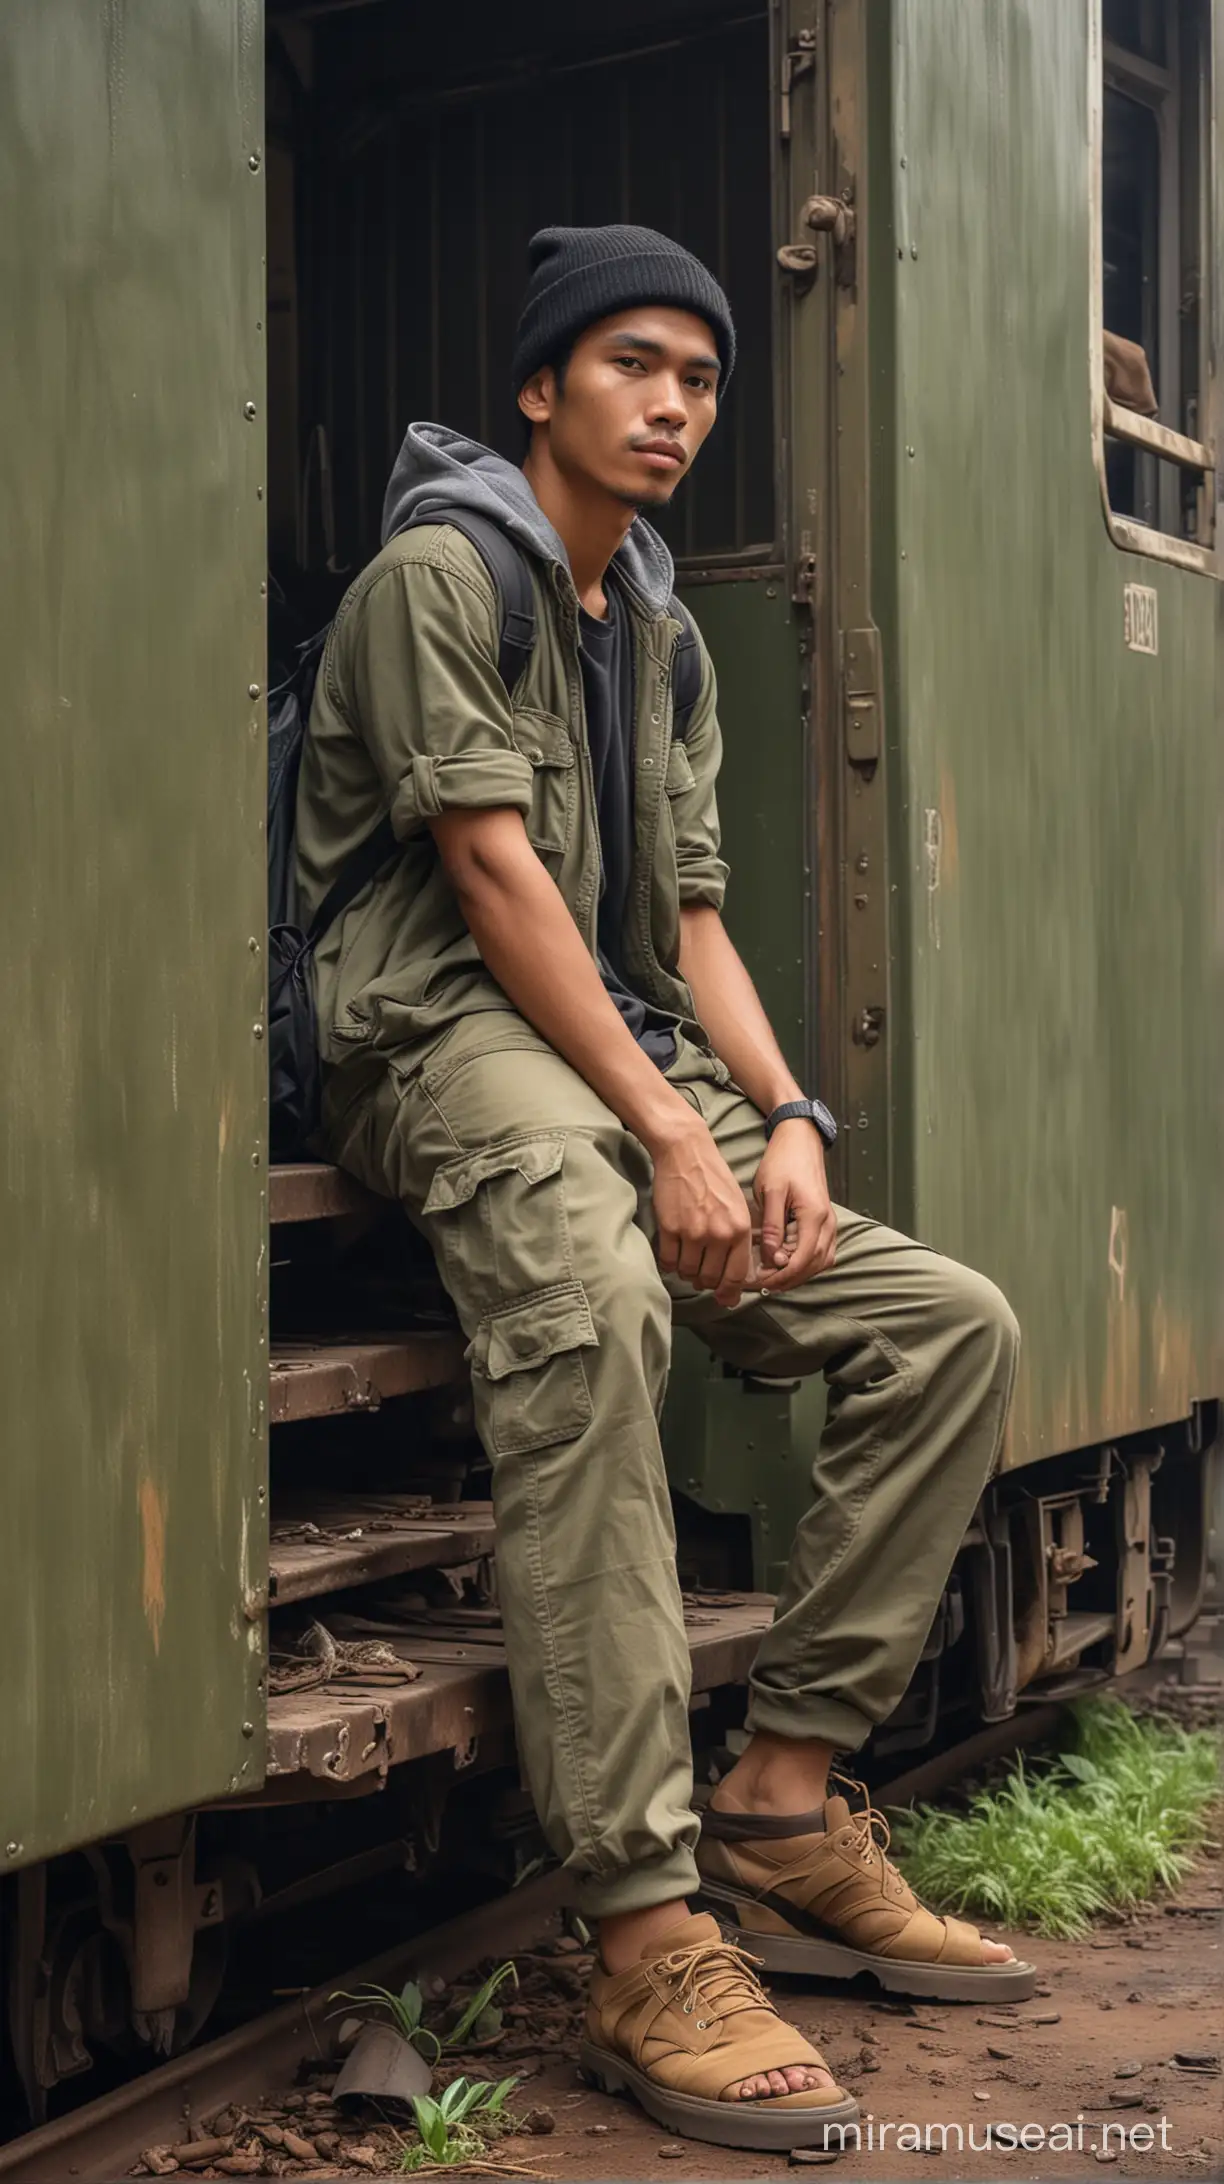 Young Indonesian Man Sitting by Abandoned Train Carriage in Rainforest Train Station